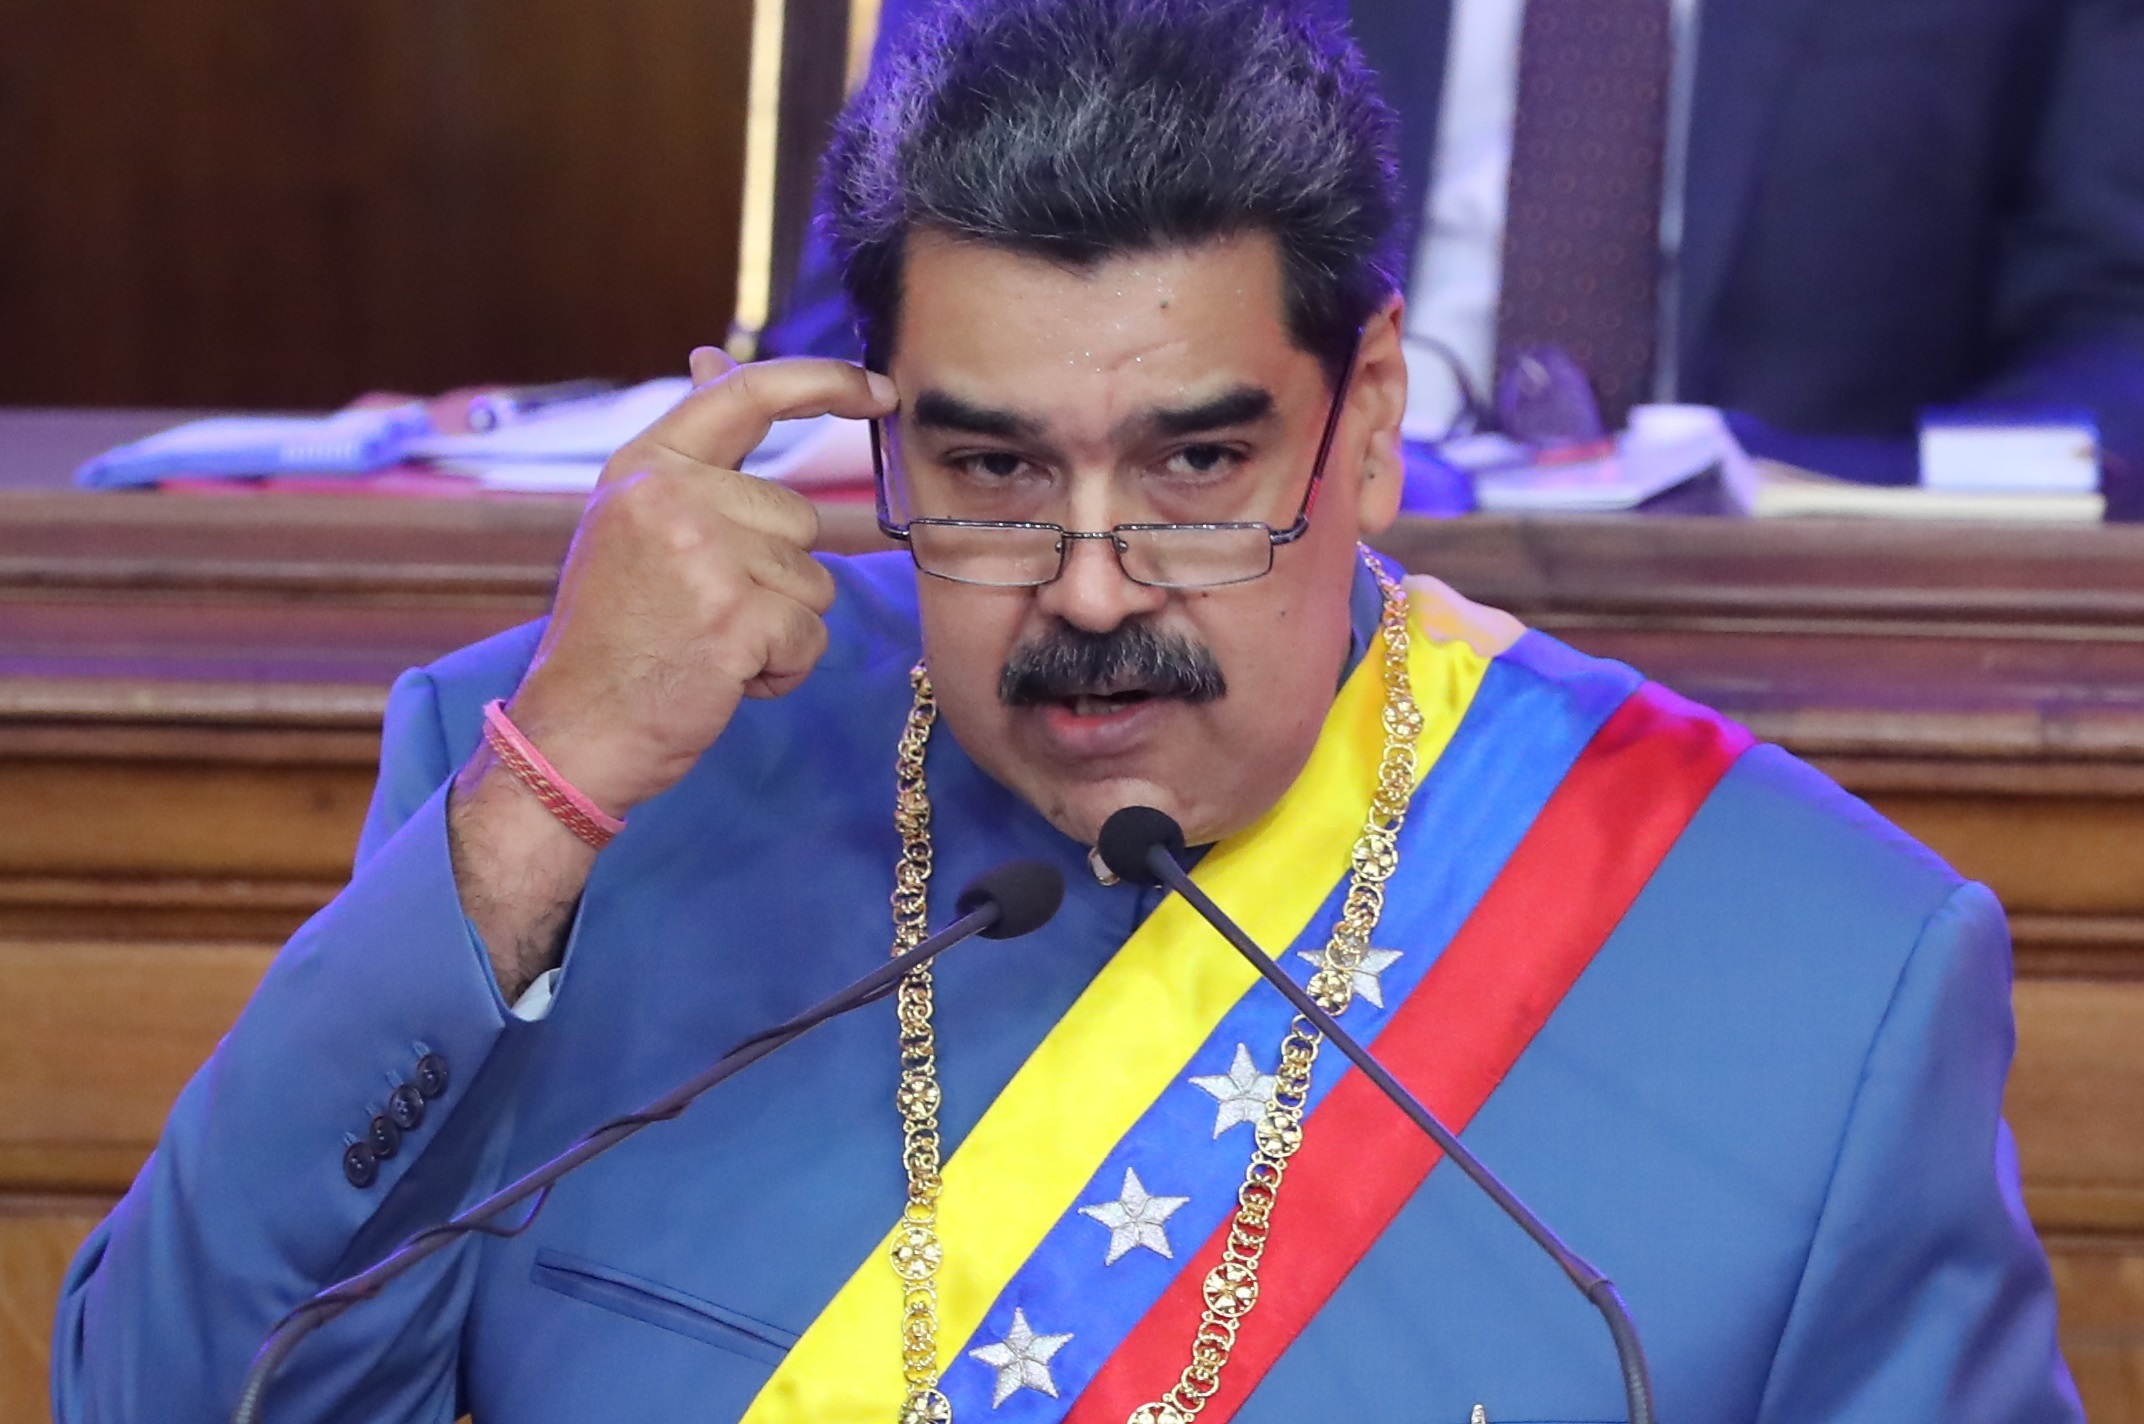 Maduro remains Venezuela’s president two years after the US declared him “illegitimate”